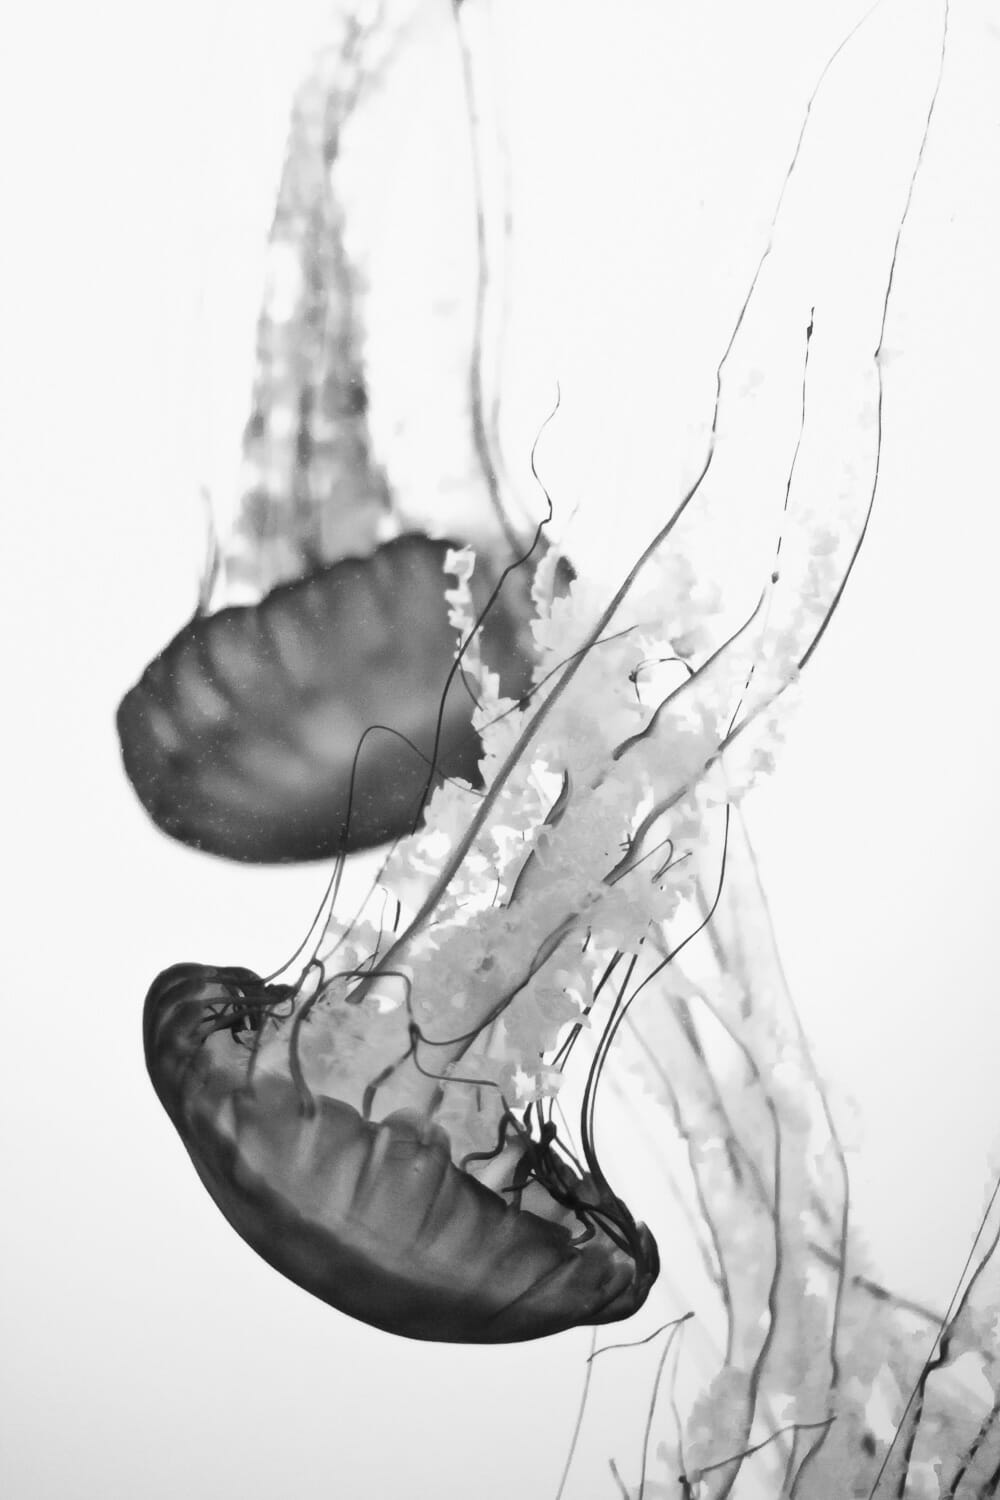 Black and white photograph of jellyfish with trailing tentacles.